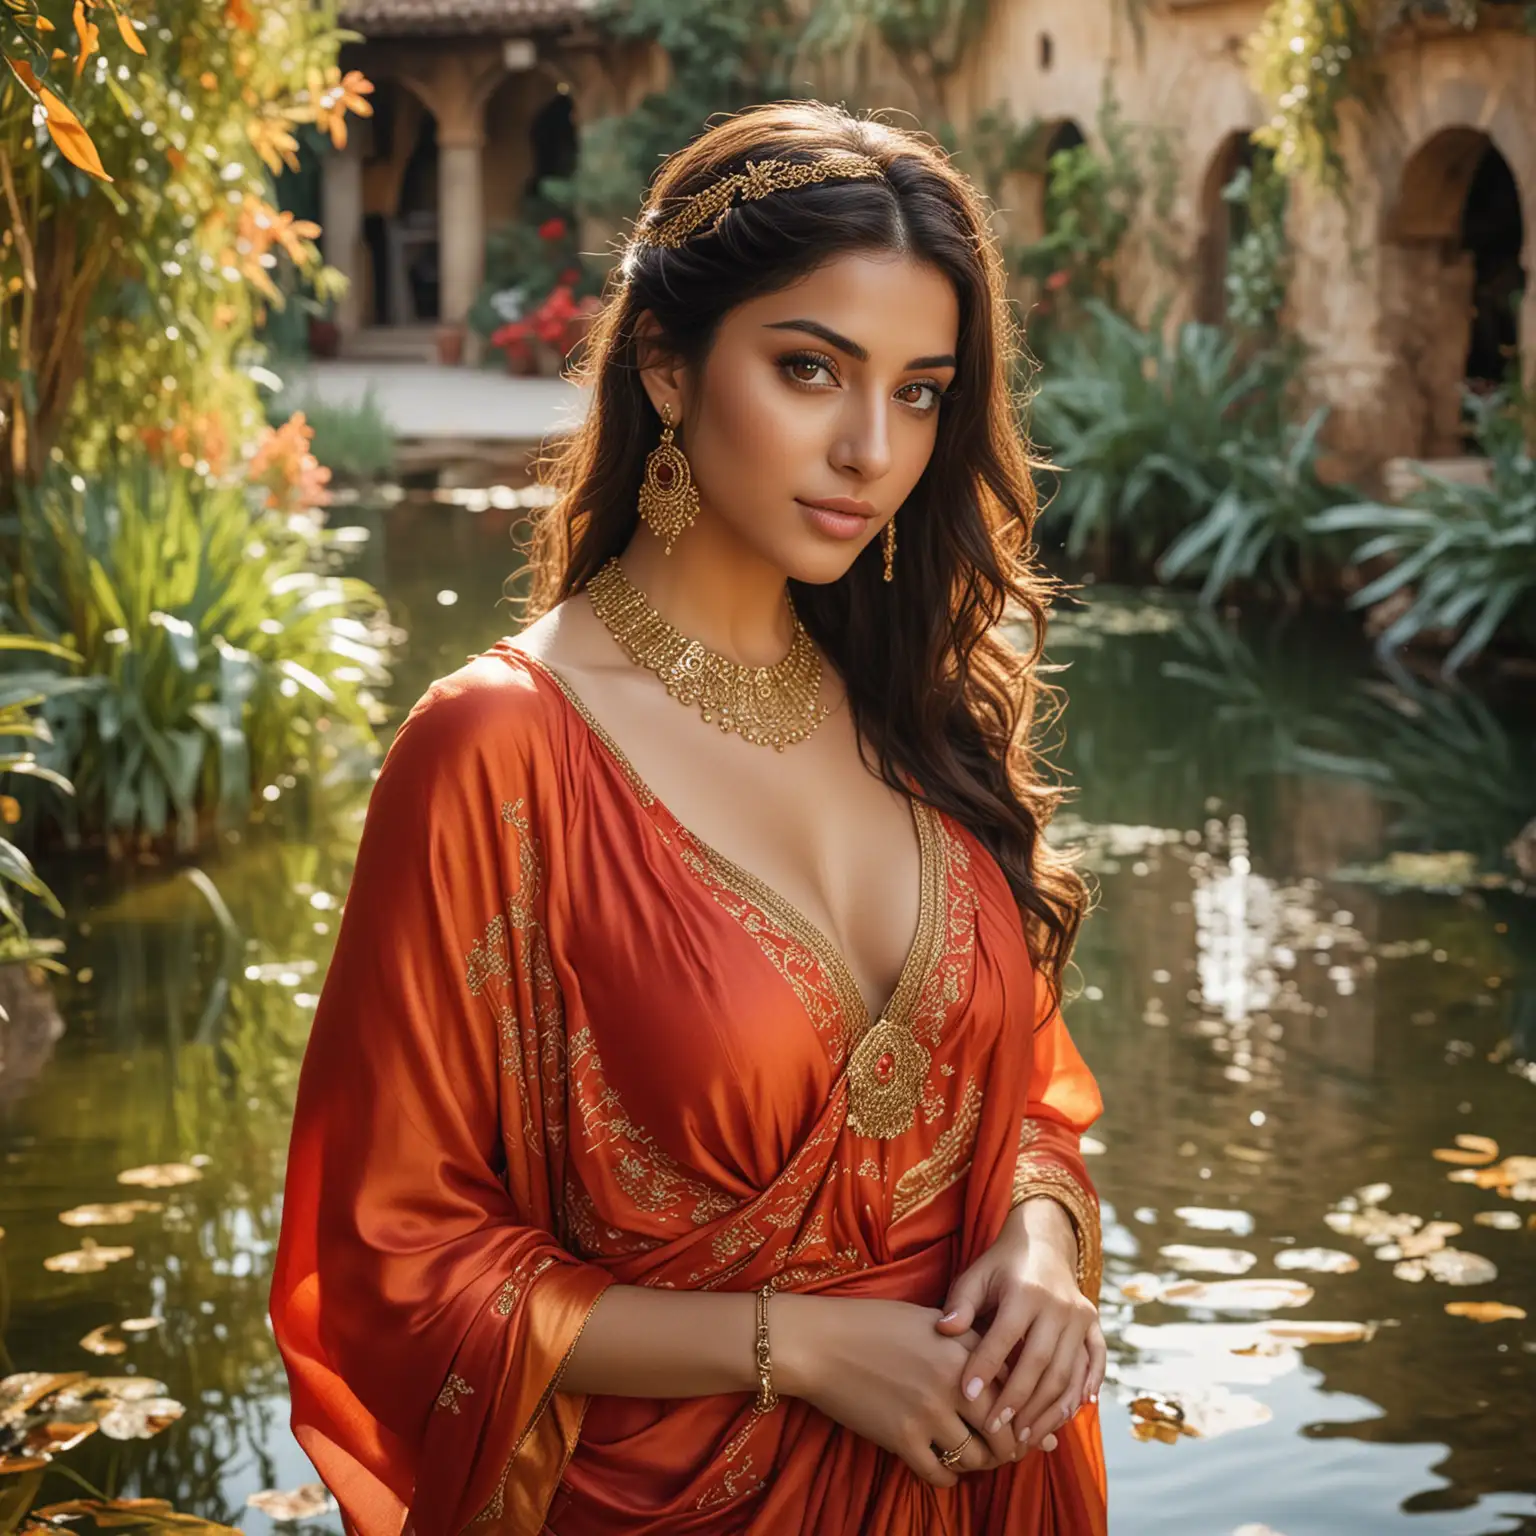 Arab woman, with thick dark hair and brown skin, light brown eyes and thick eyelashes, with delicate features, wearing a red and orange silk toga gown, heavy gold jewelry, in Mediterranean water garden, medieval setting